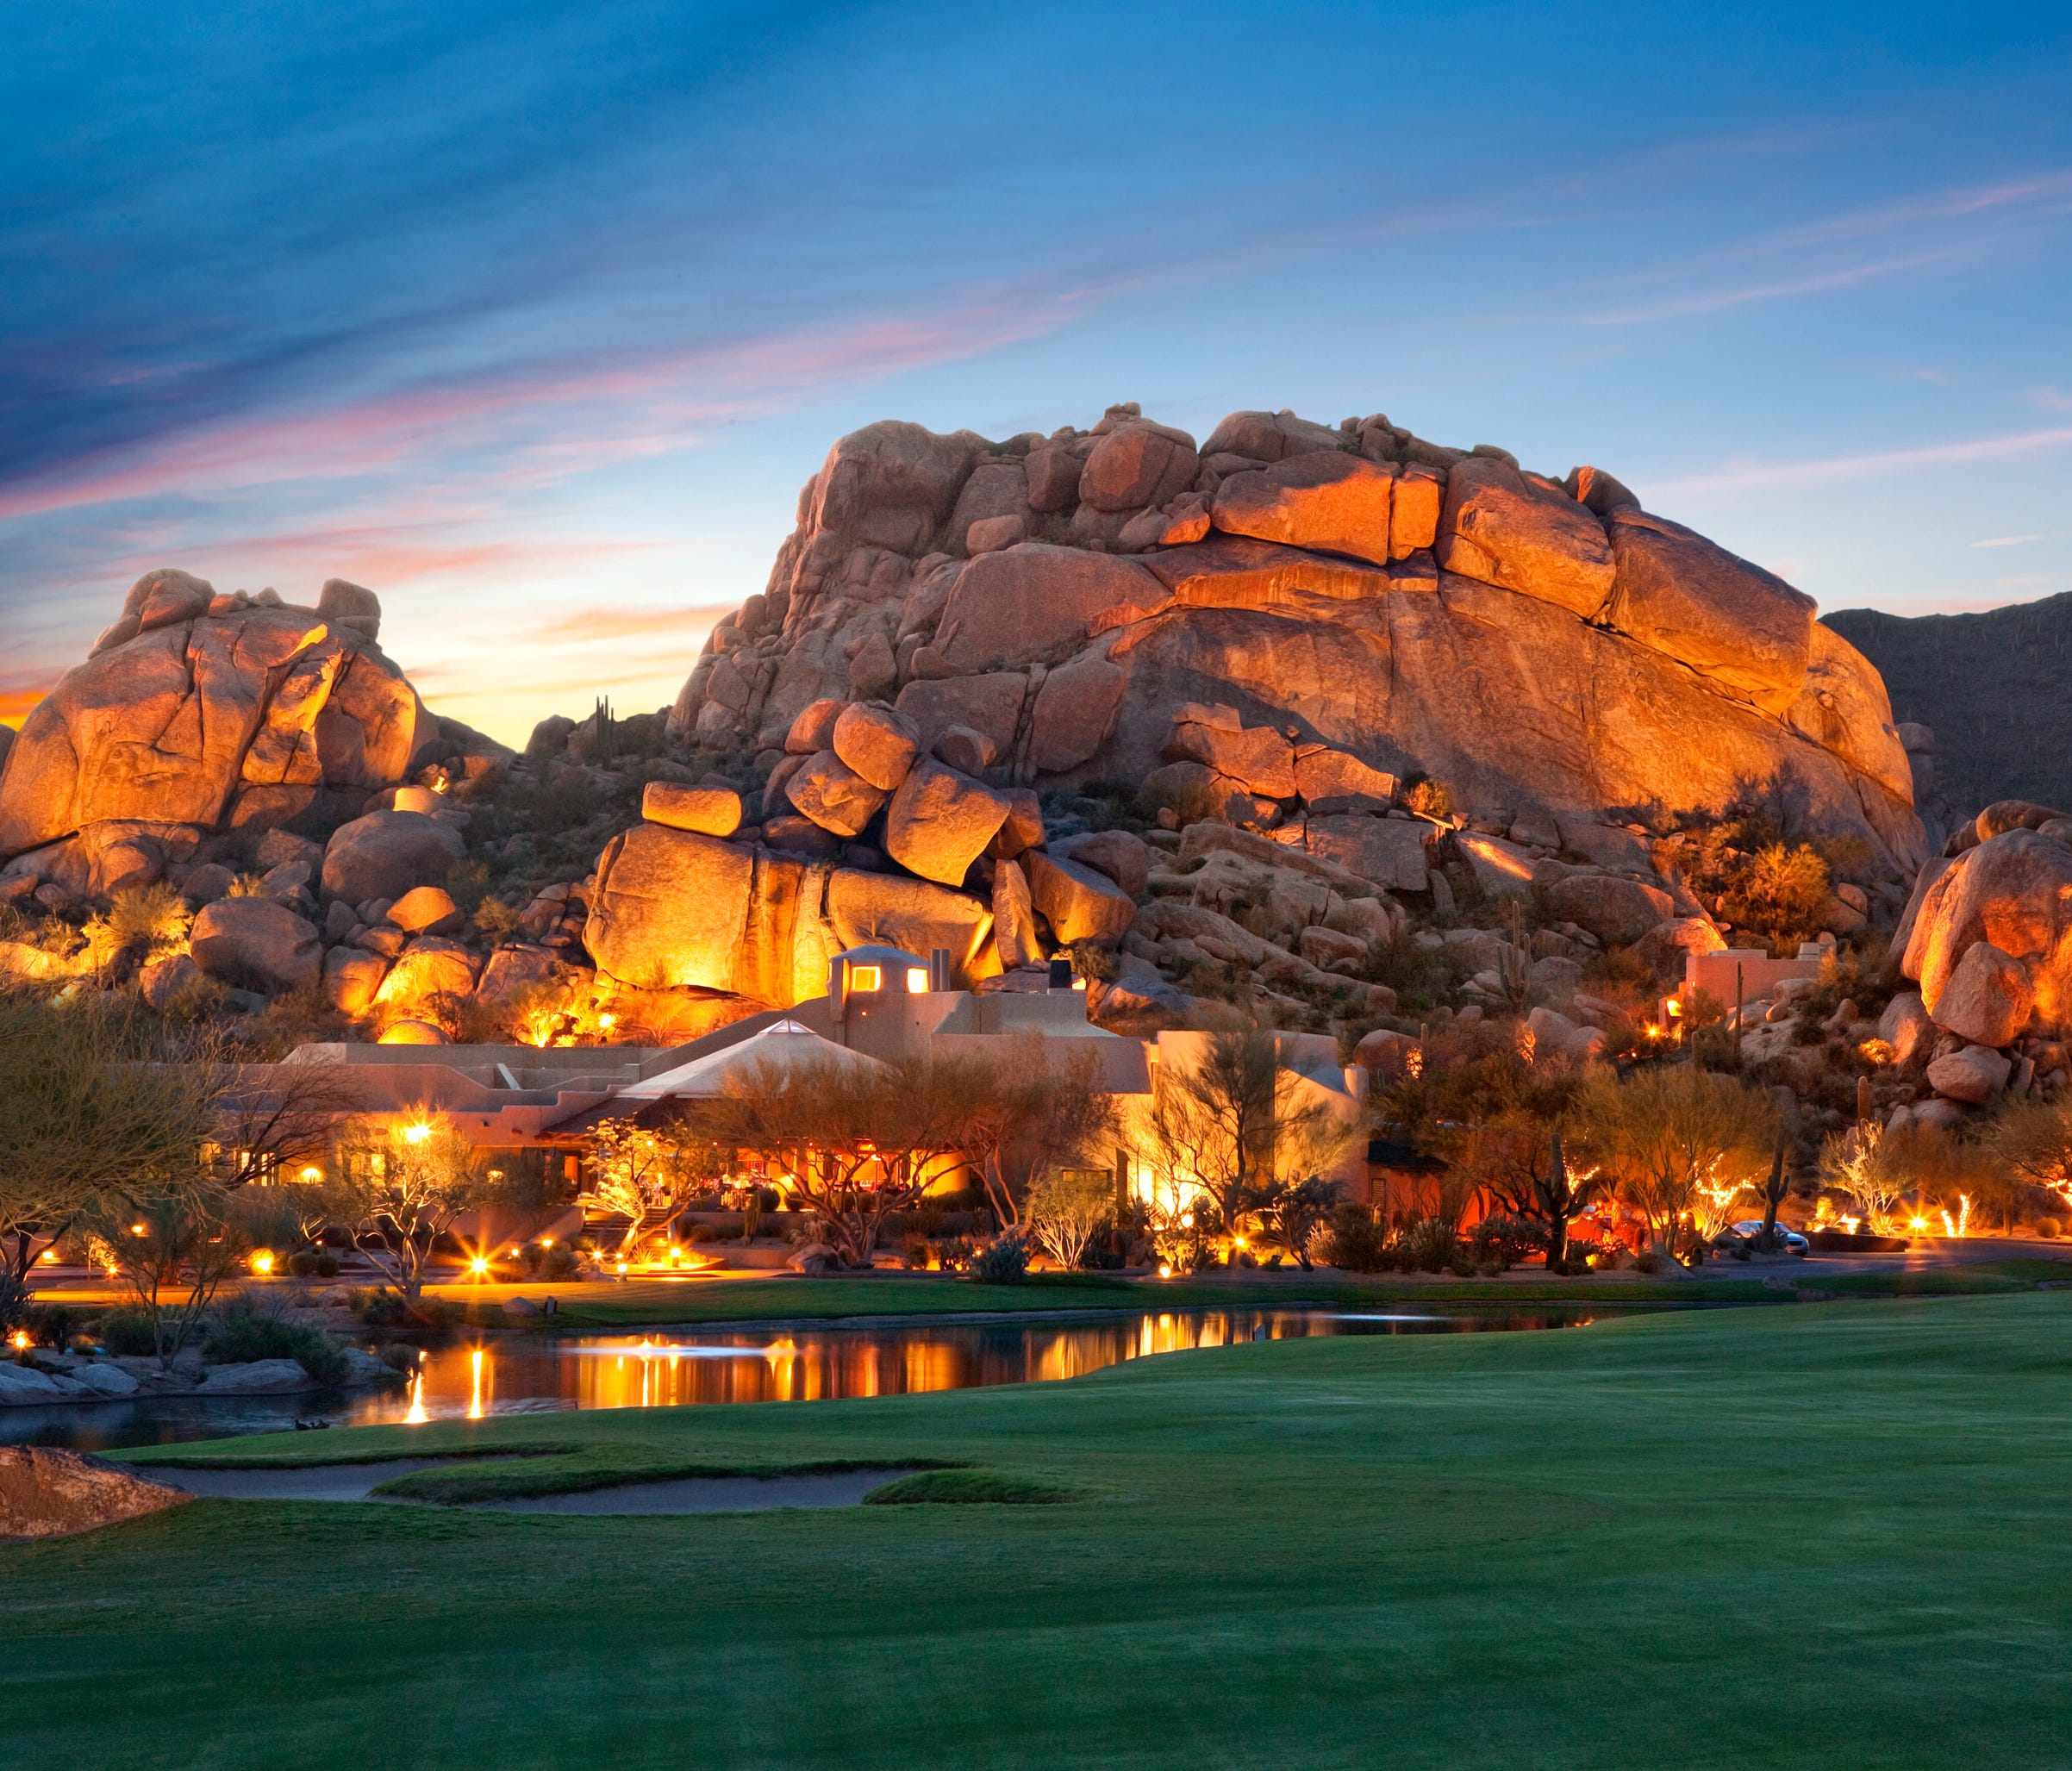 The Boulders is one of Scottsdale's most acclaimed golf resorts, with 36 holes and a dramatic natural setting showcasing the Sonoran Desert ecosystem.